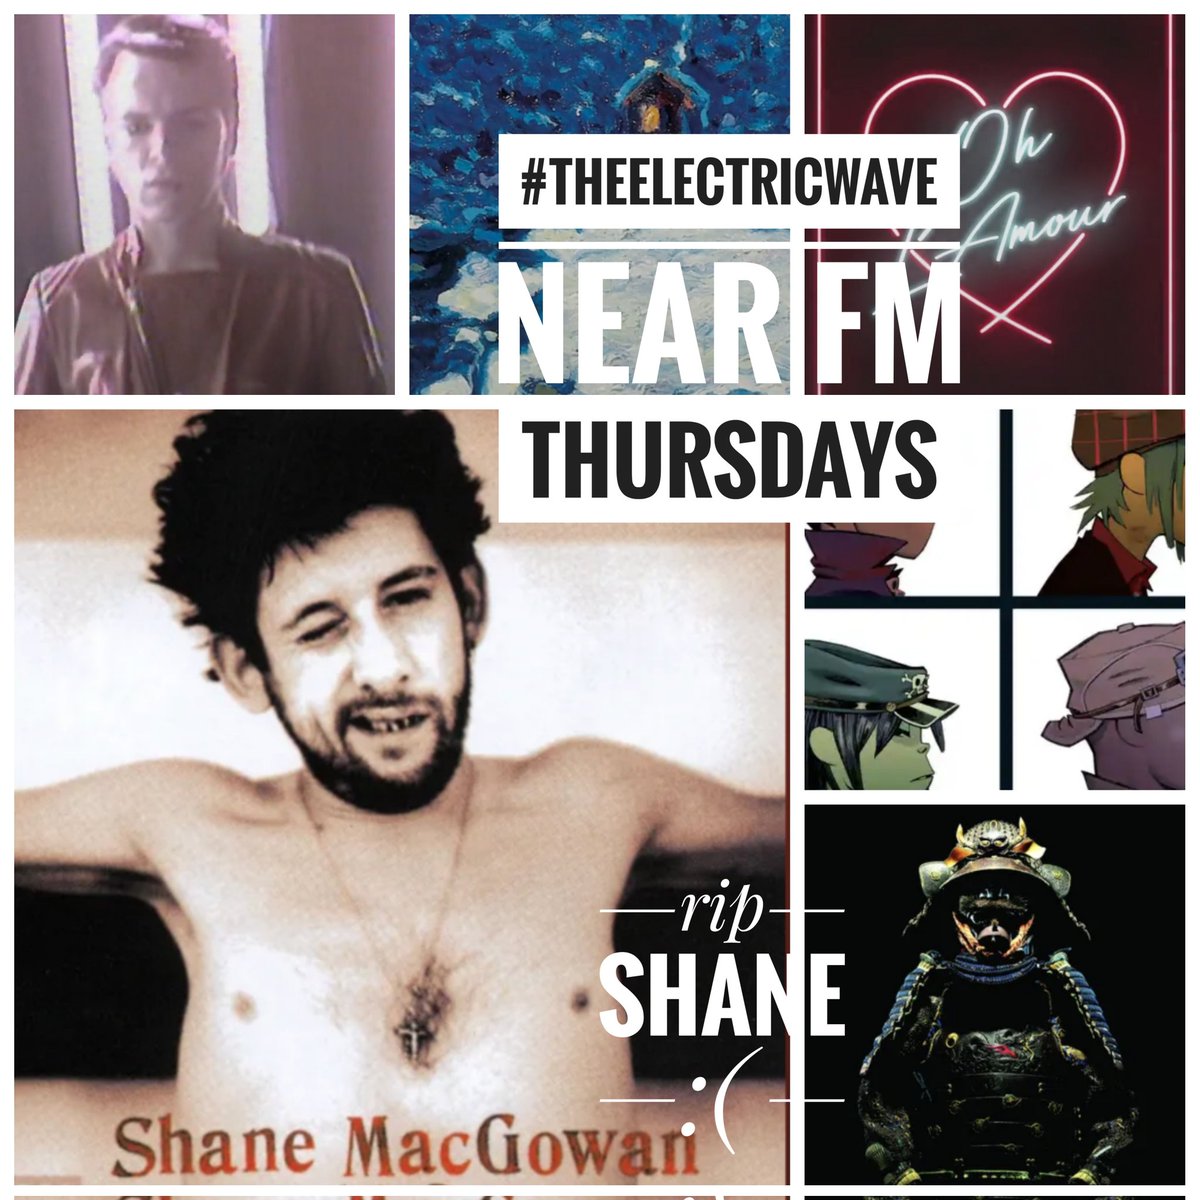 I had planned on this wk's #theelectricwave being an adverts special (with Erasure's #OhLamour back in the charts cause of a Car advert) but.... we'll now also pay our own little tribute to the uniqueness of #ShaneMacGowan too. #Rip :( @nearfm Thursdays 7pm #liveradio